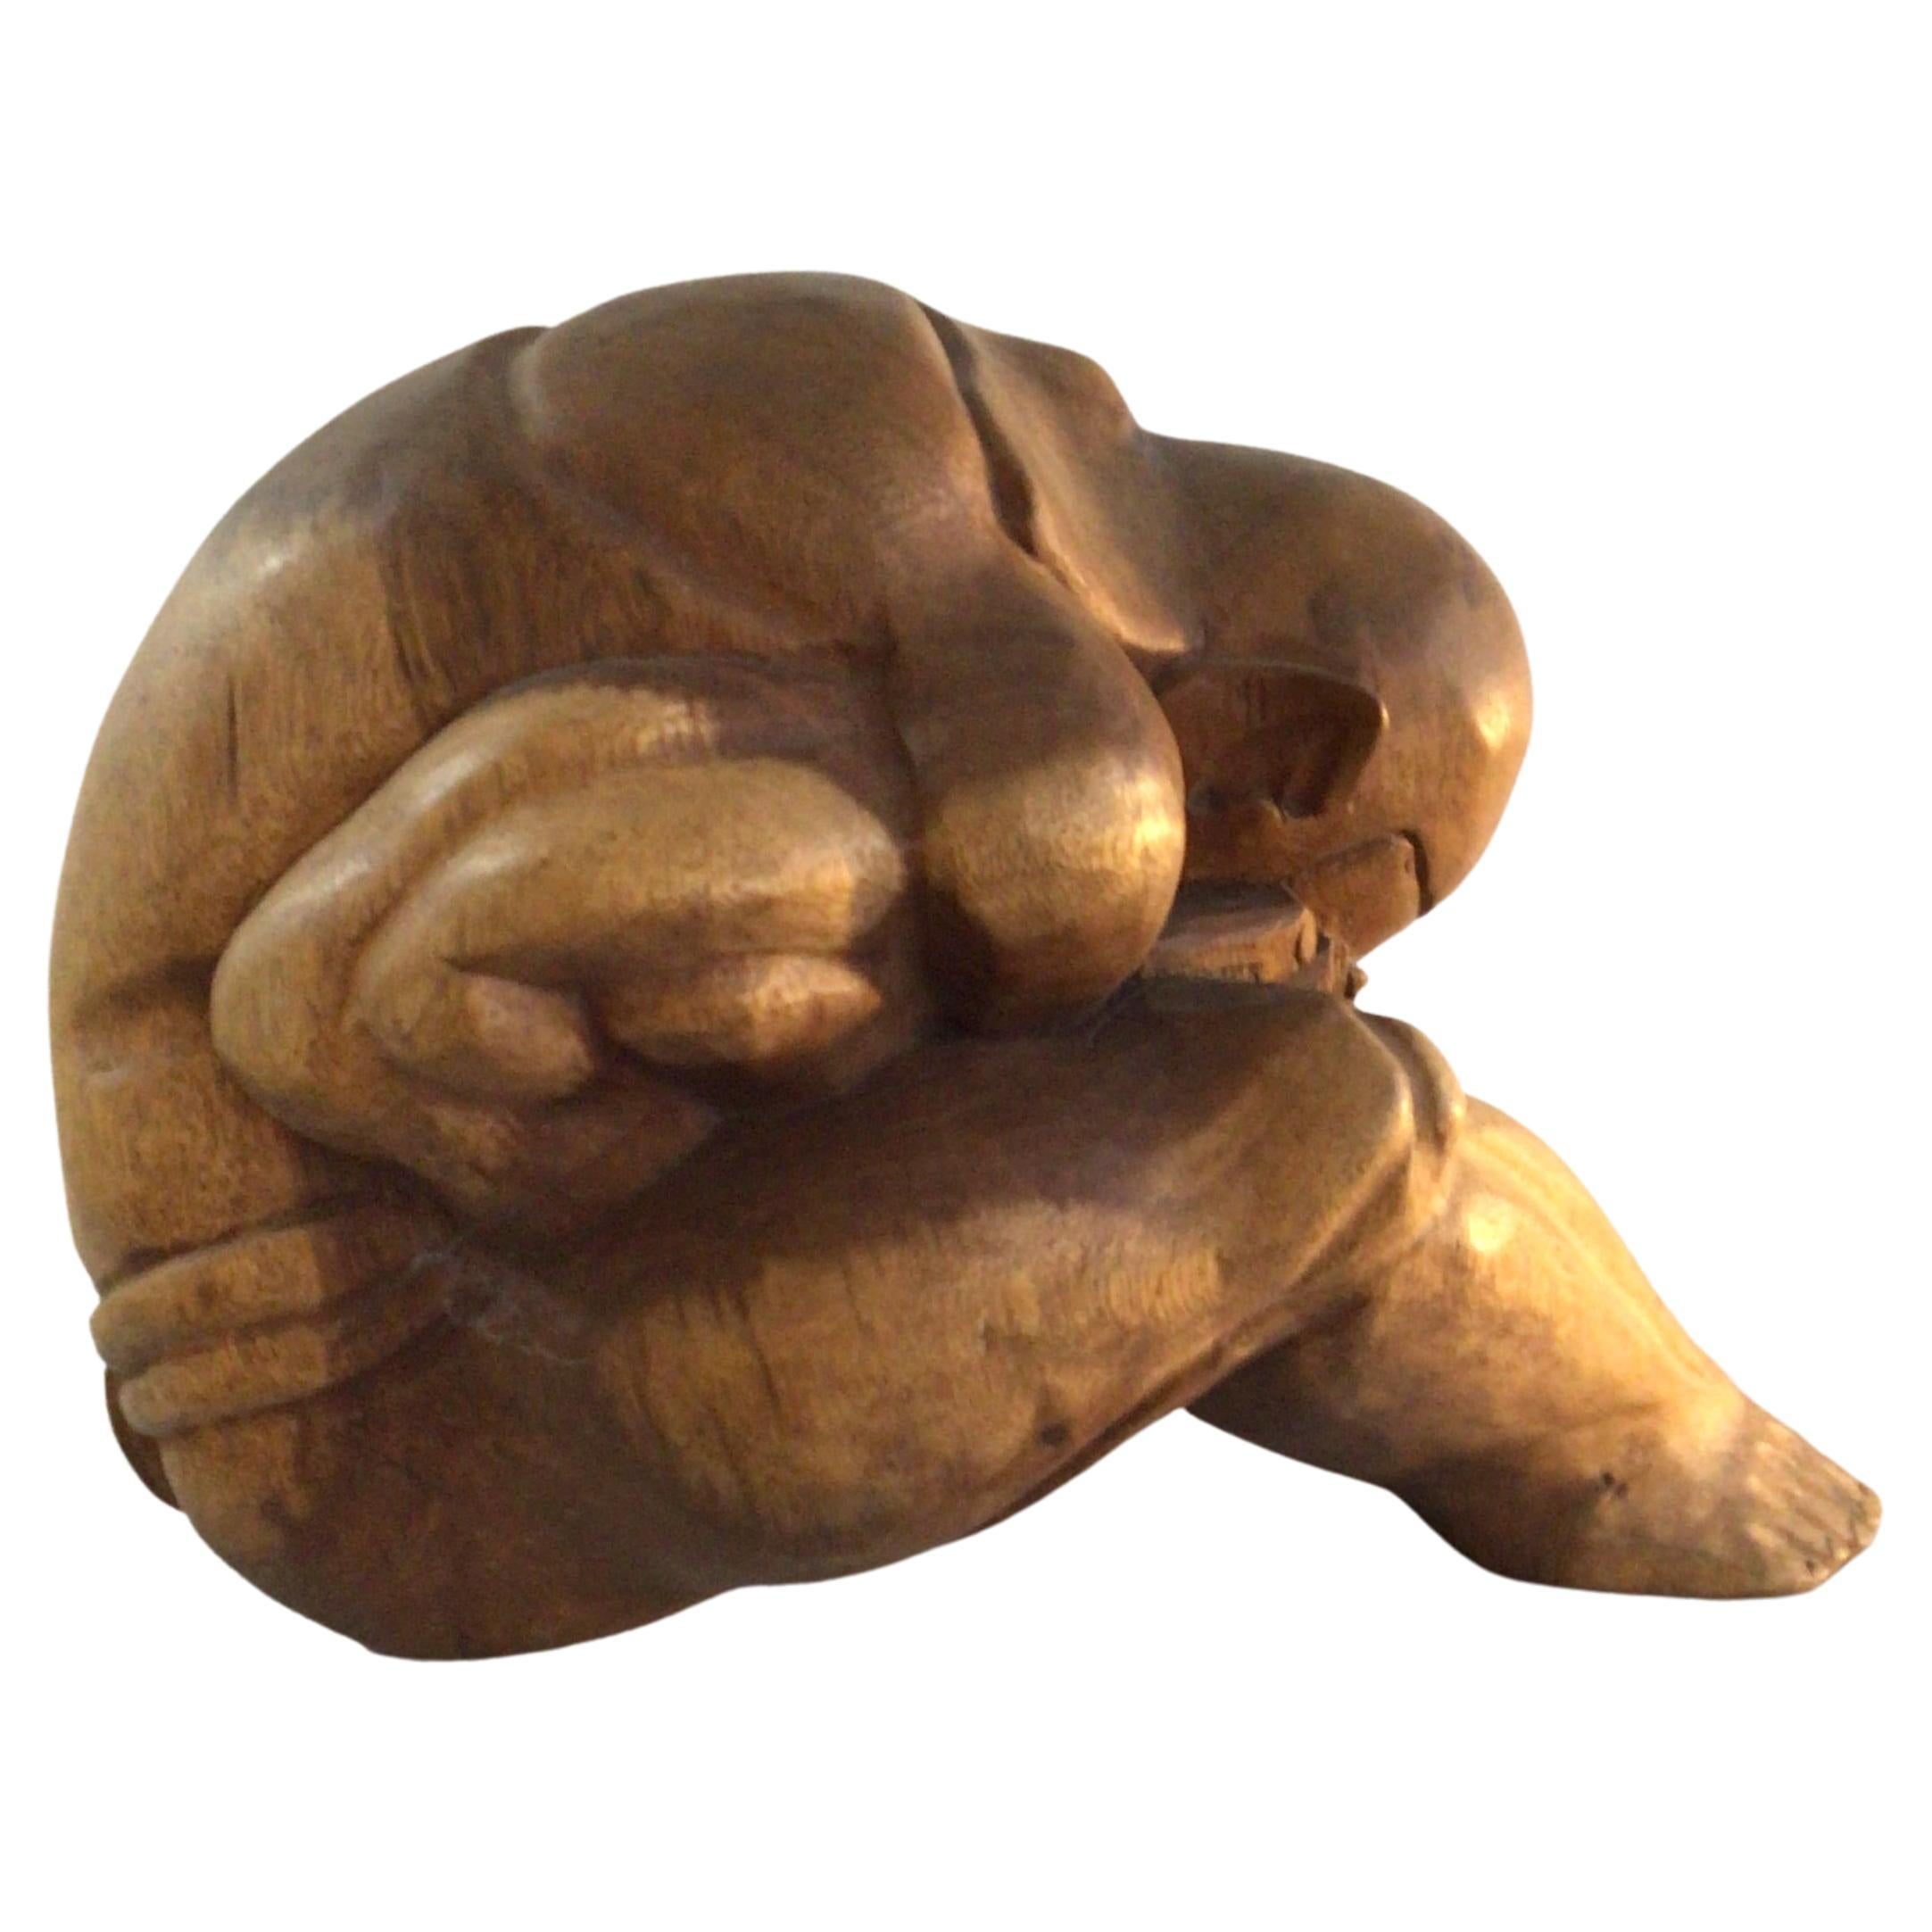 1960s Hand Carved Wood Sculpture Of Man Praying / Weeping For Sale